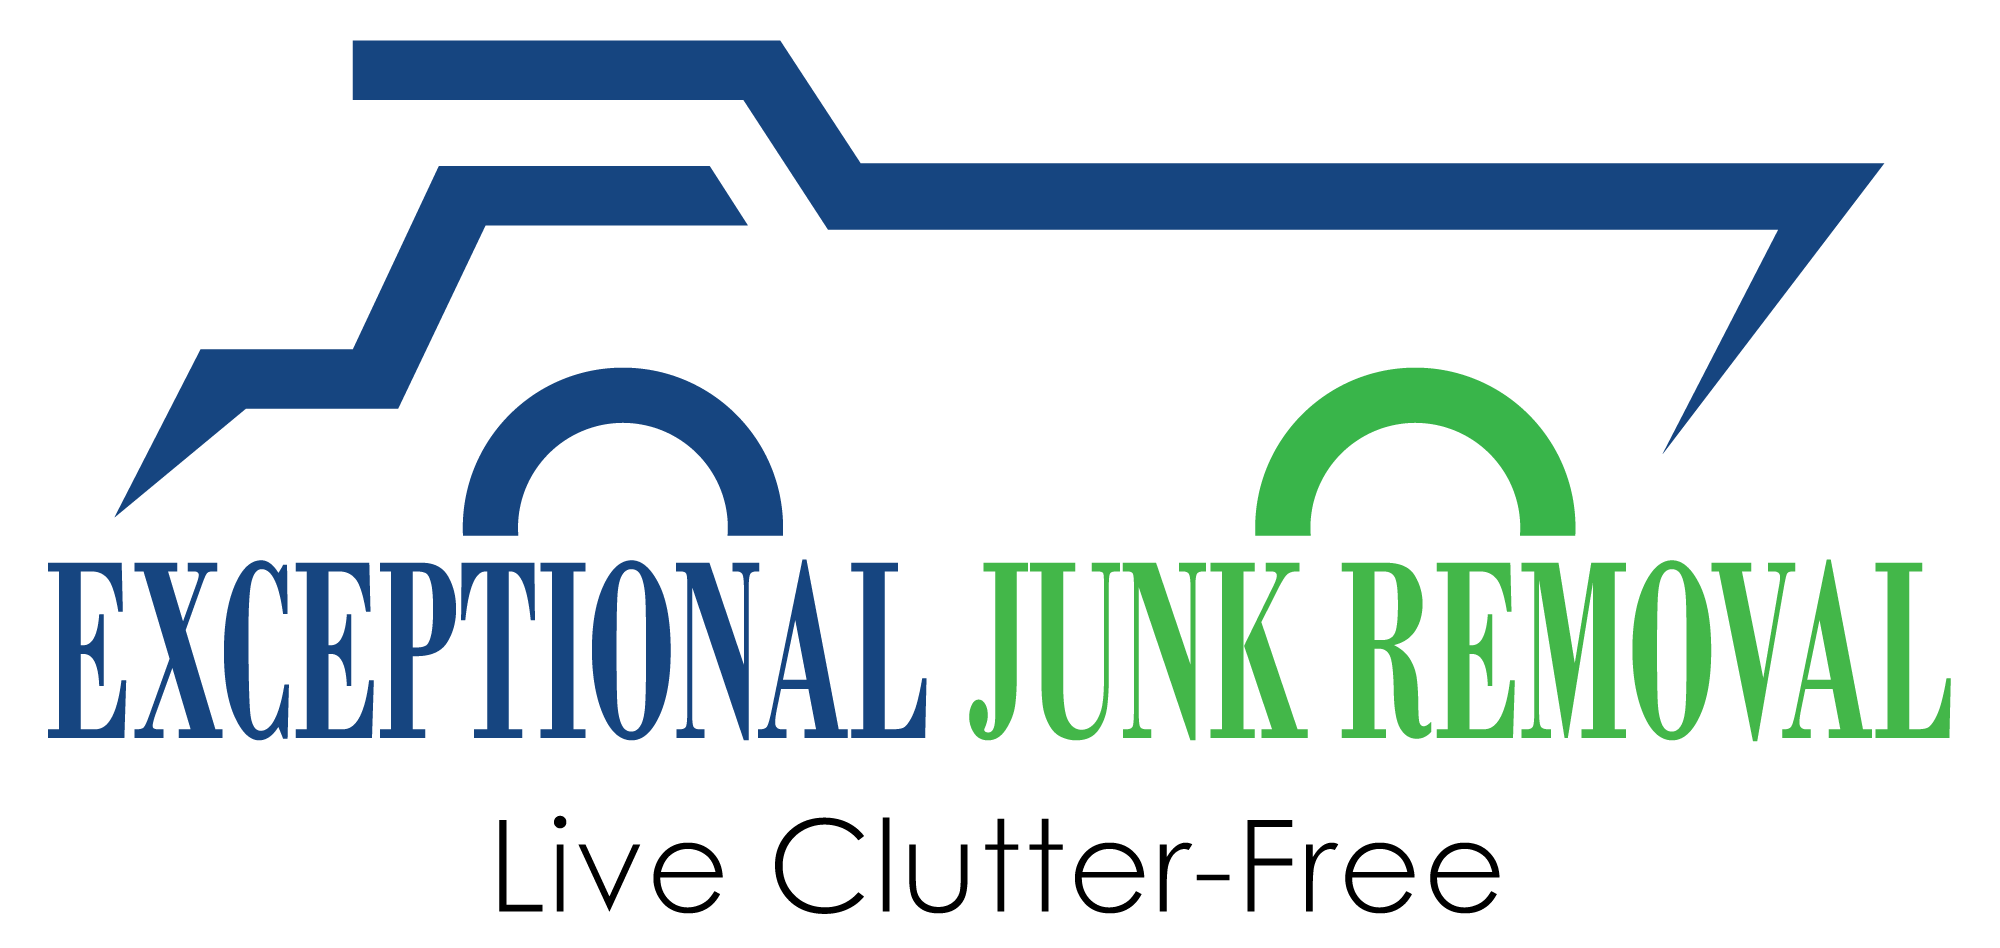 Exceptional Junk Removal